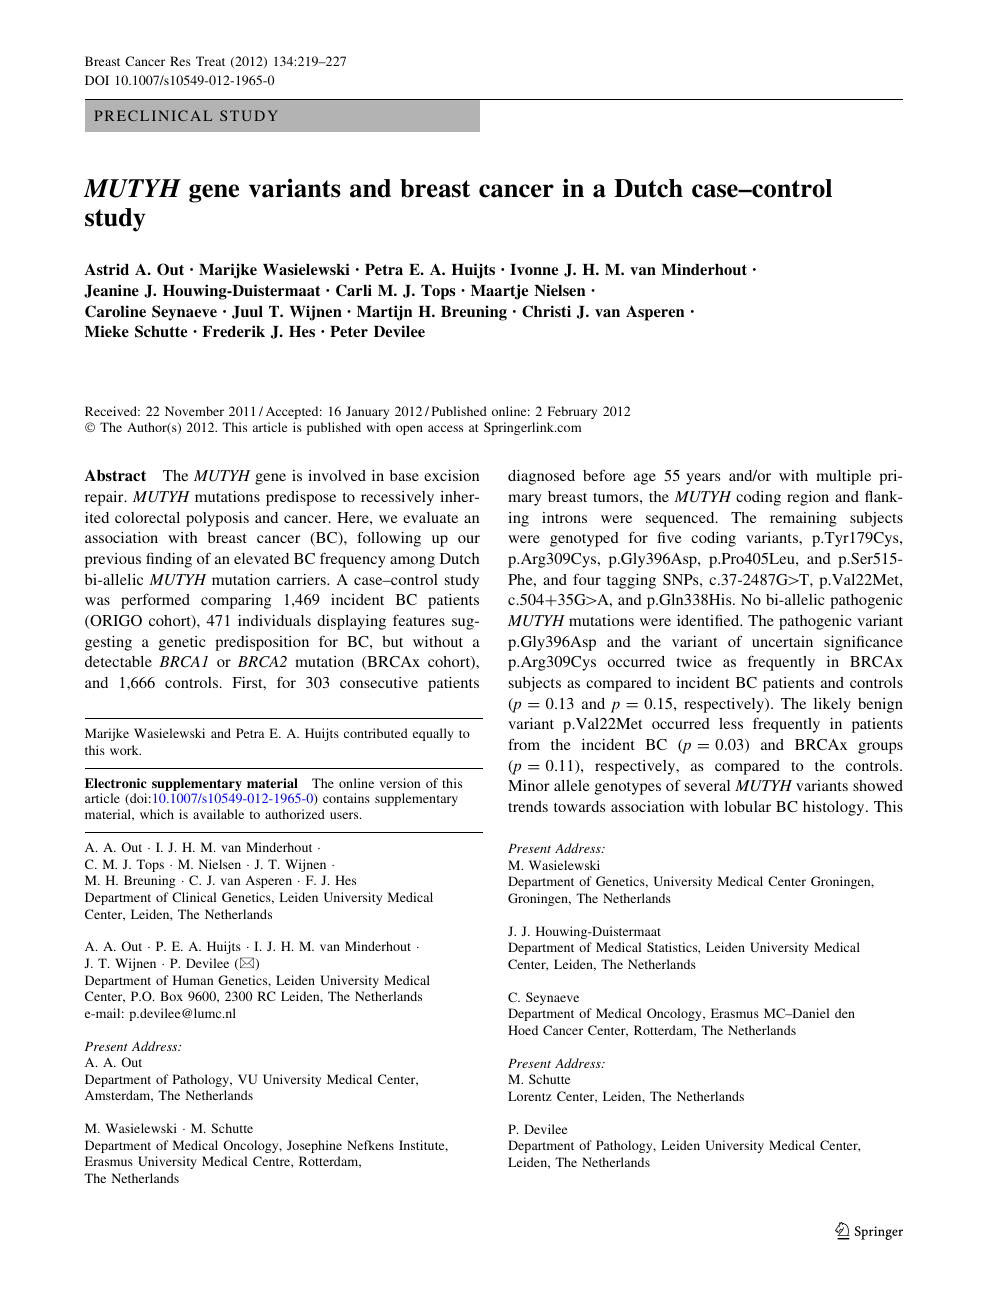 Mutyh Gene Variants And Breast Cancer In A Dutch Case Control Study Topic Of Research Paper In Biological Sciences Download Scholarly Article Pdf And Read For Free On Cyberleninka Open Science Hub